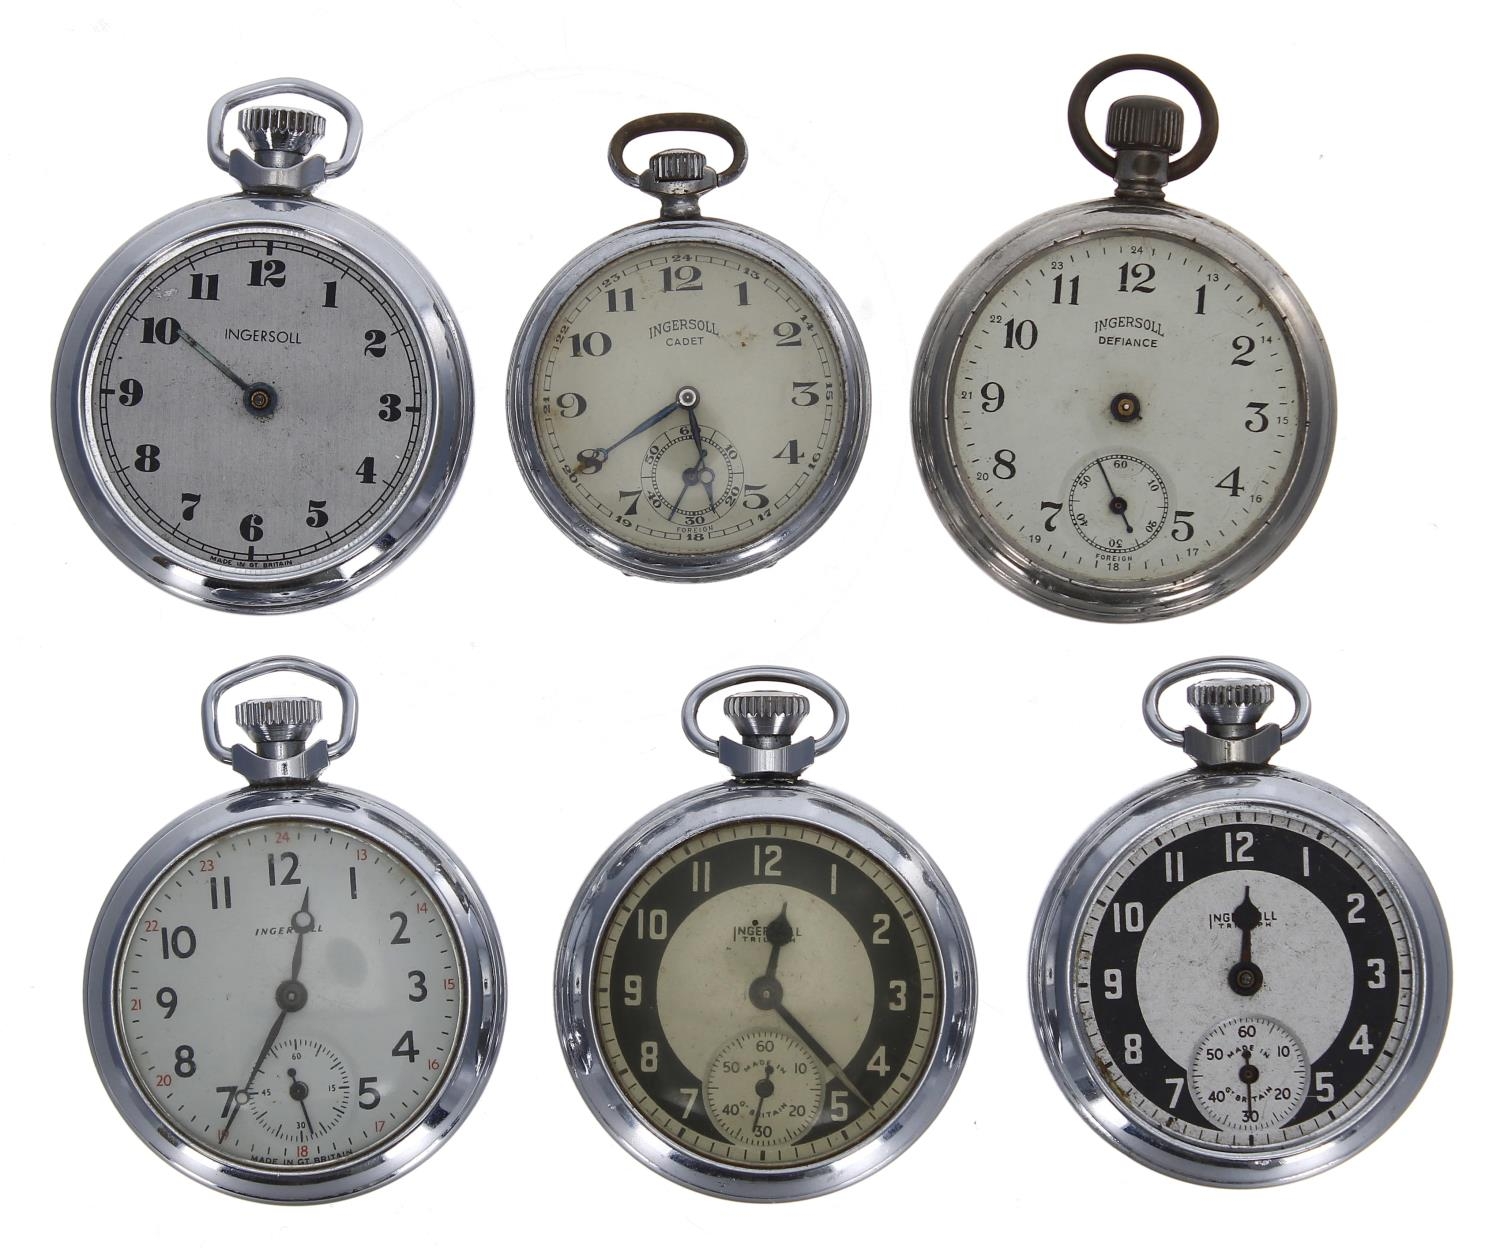 Six Ingersoll chrome cased pocket watches to include two Ingersoll Triumph, Ingersoll Defiance and